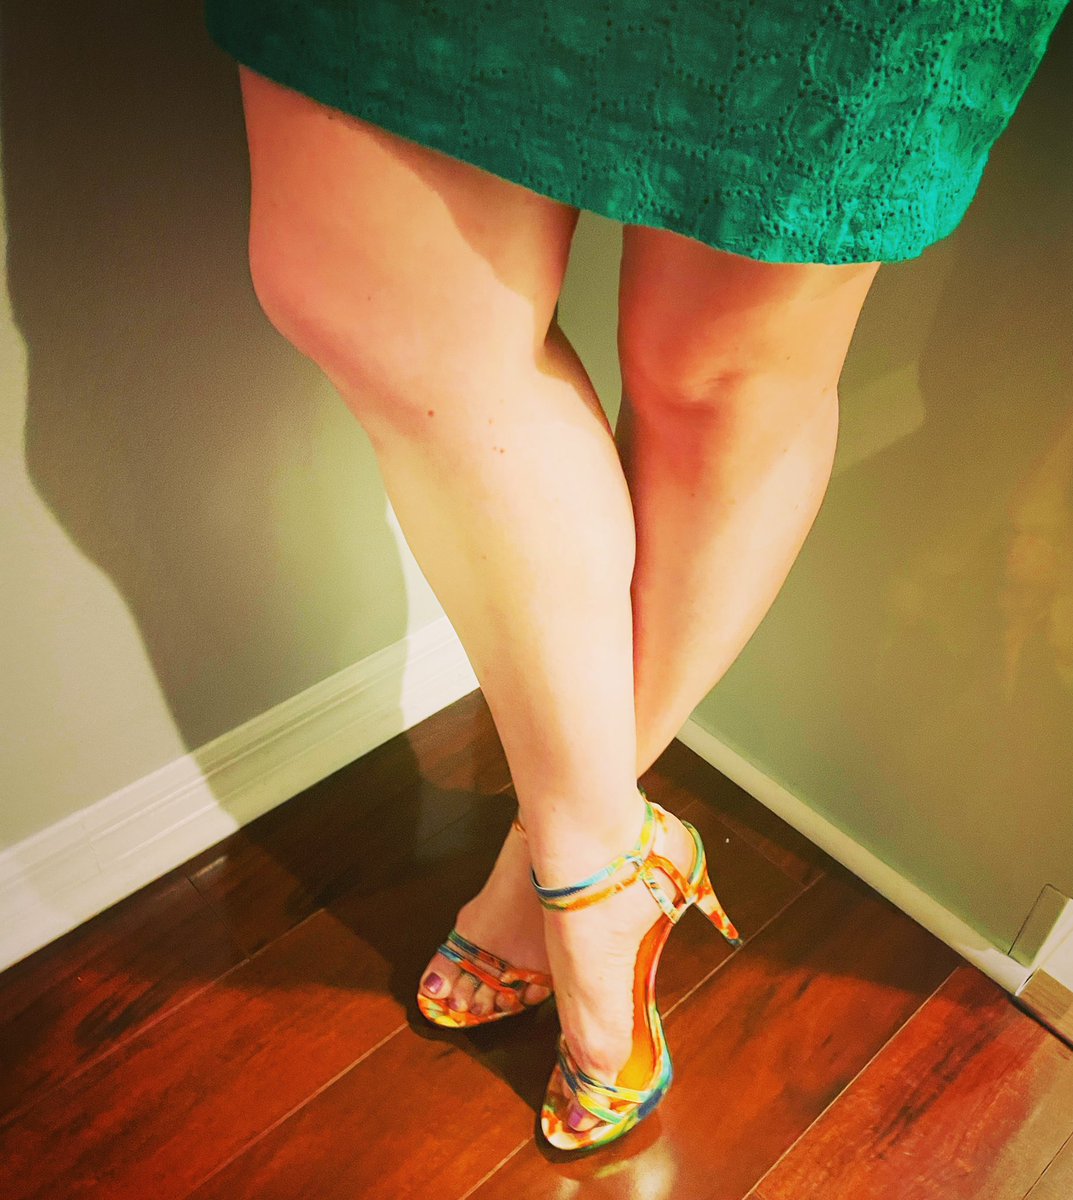 The week of green continues in this @calvinklein #eyeletdress and these @ninewest #highheels which one of my absolute favorite pairs. #happystpatricksday #weargreen #ninewest #ninewestshoes #shoelove365 #shoes #shoelove #shoelover #heellove #heellover #highheels #heels